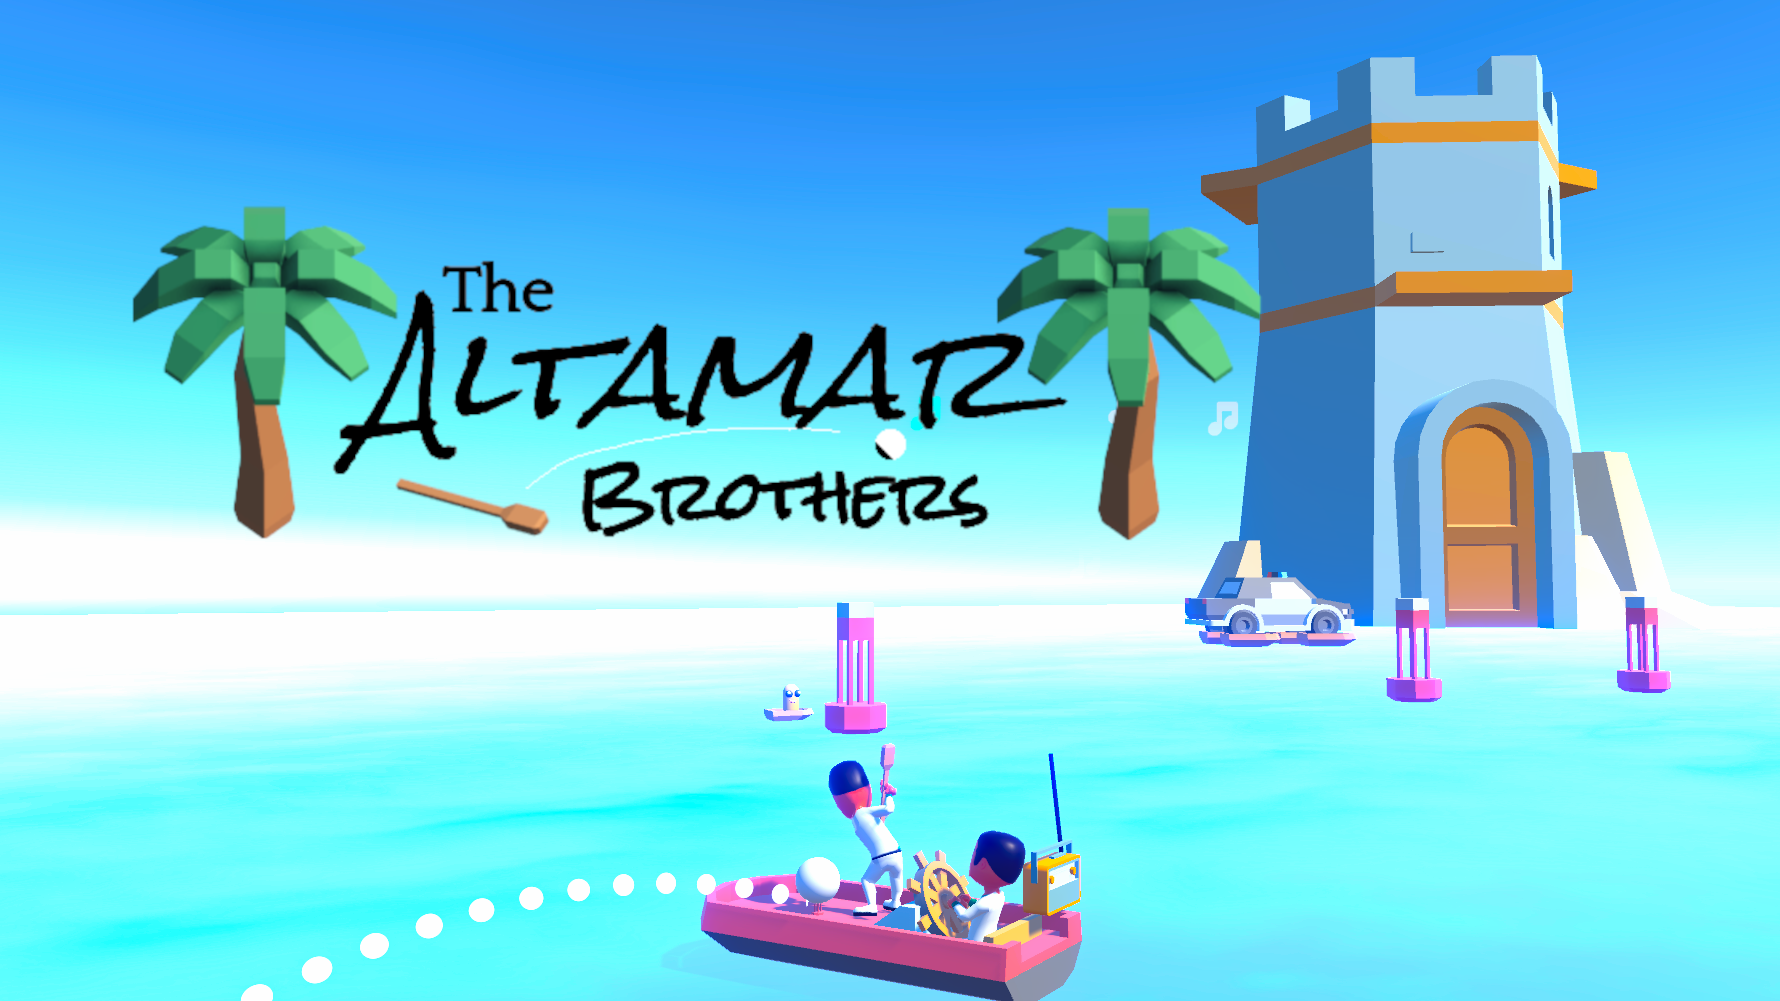 The Altamar Brothers